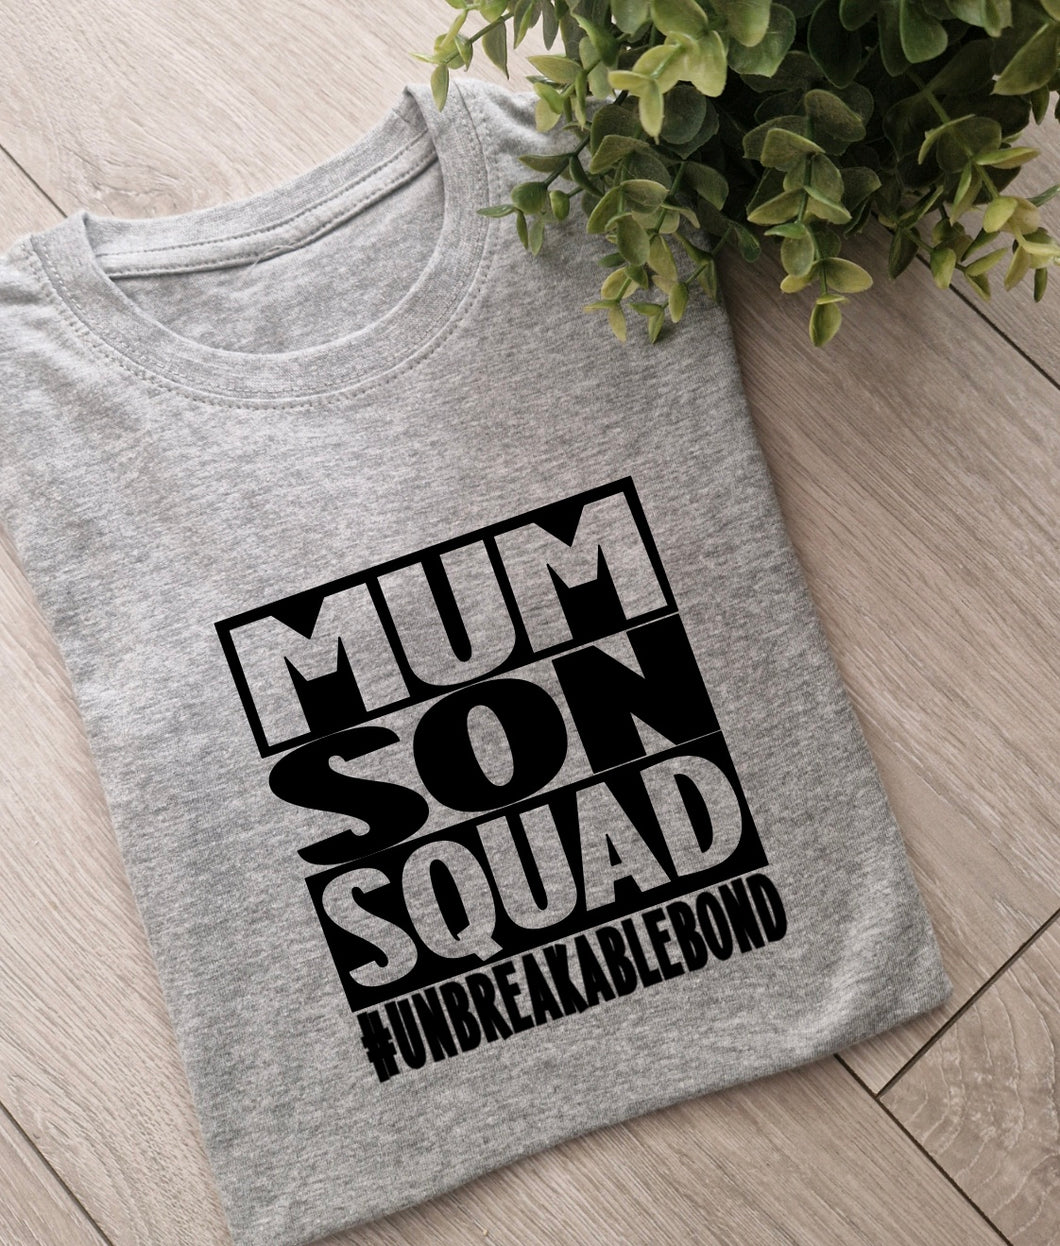 Mum, son squad Adults and Childs Tshirt